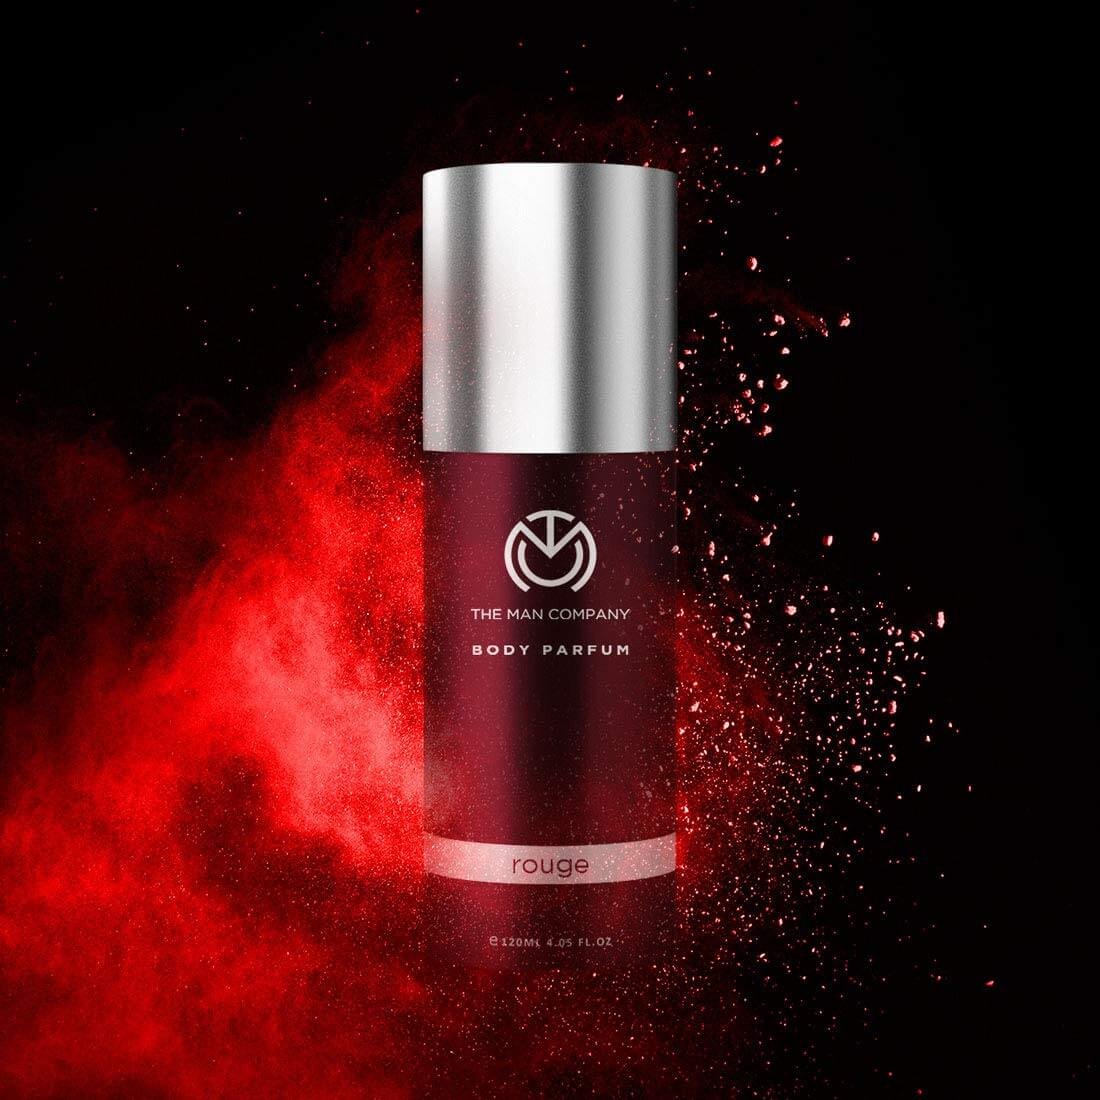 https://shoppingyatra.com/product_images/The Man Company Body Perfume For Men - Rouge  No Gas Deodorant  Body Spray For Men  Long Lasting Fragrance -120ml3.jpg